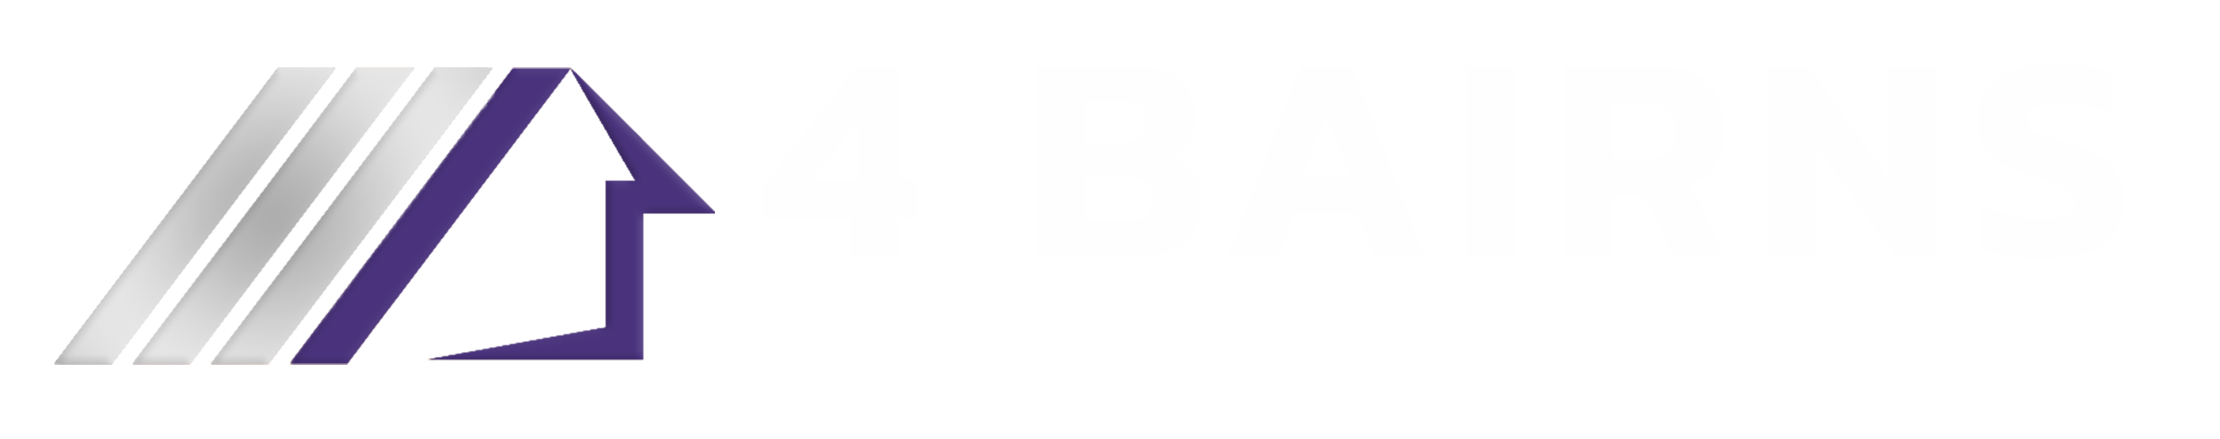 4 Bairns Roofing & Property Services Logo White